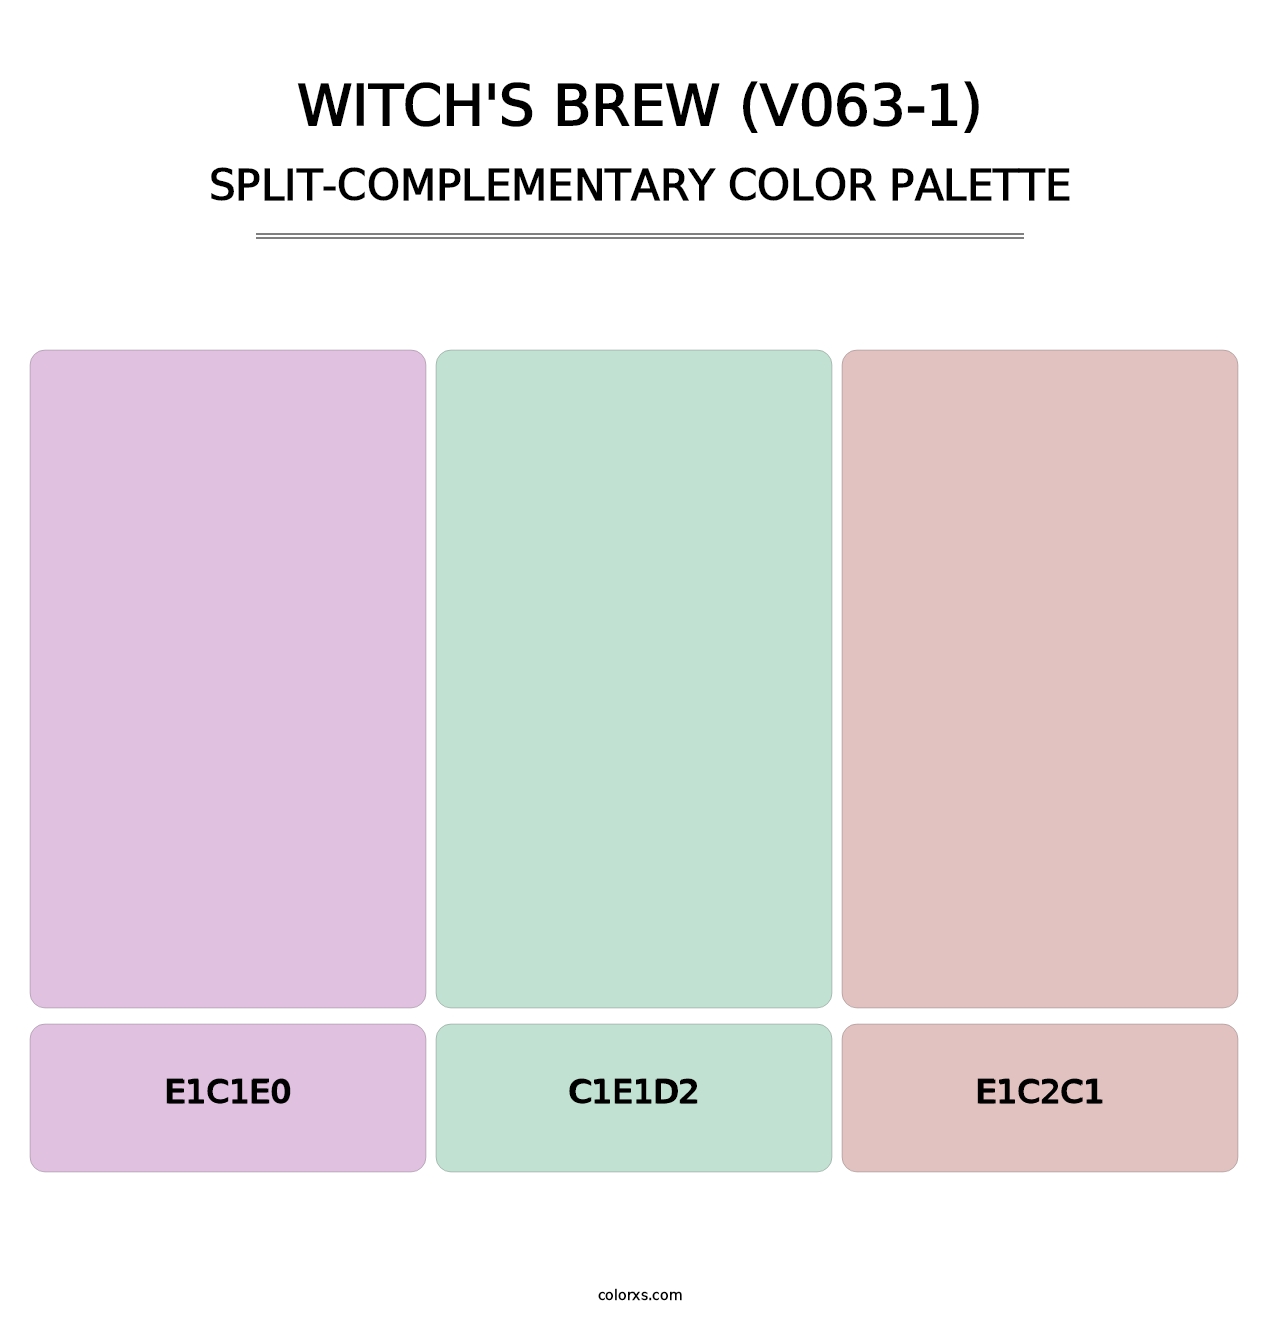 Witch's Brew (V063-1) - Split-Complementary Color Palette